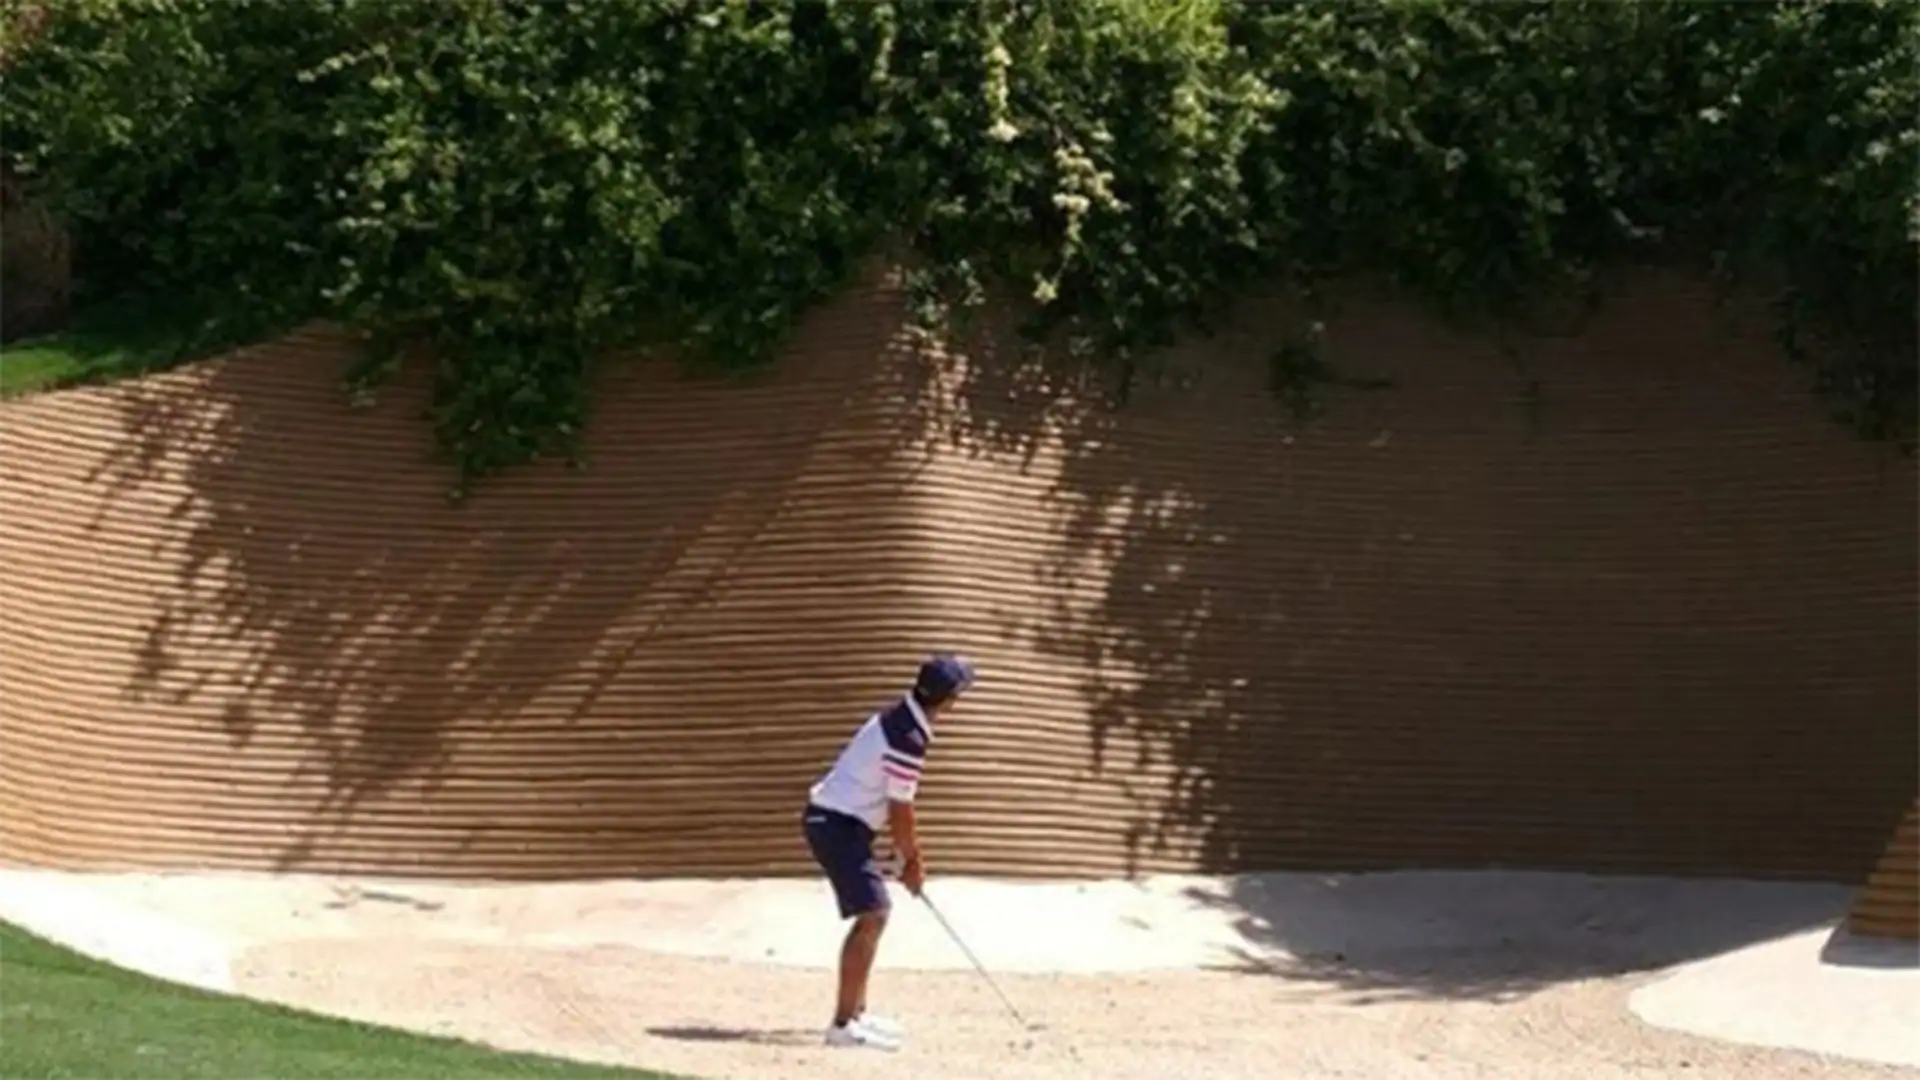 Check out this insane bunker at the Indian Open